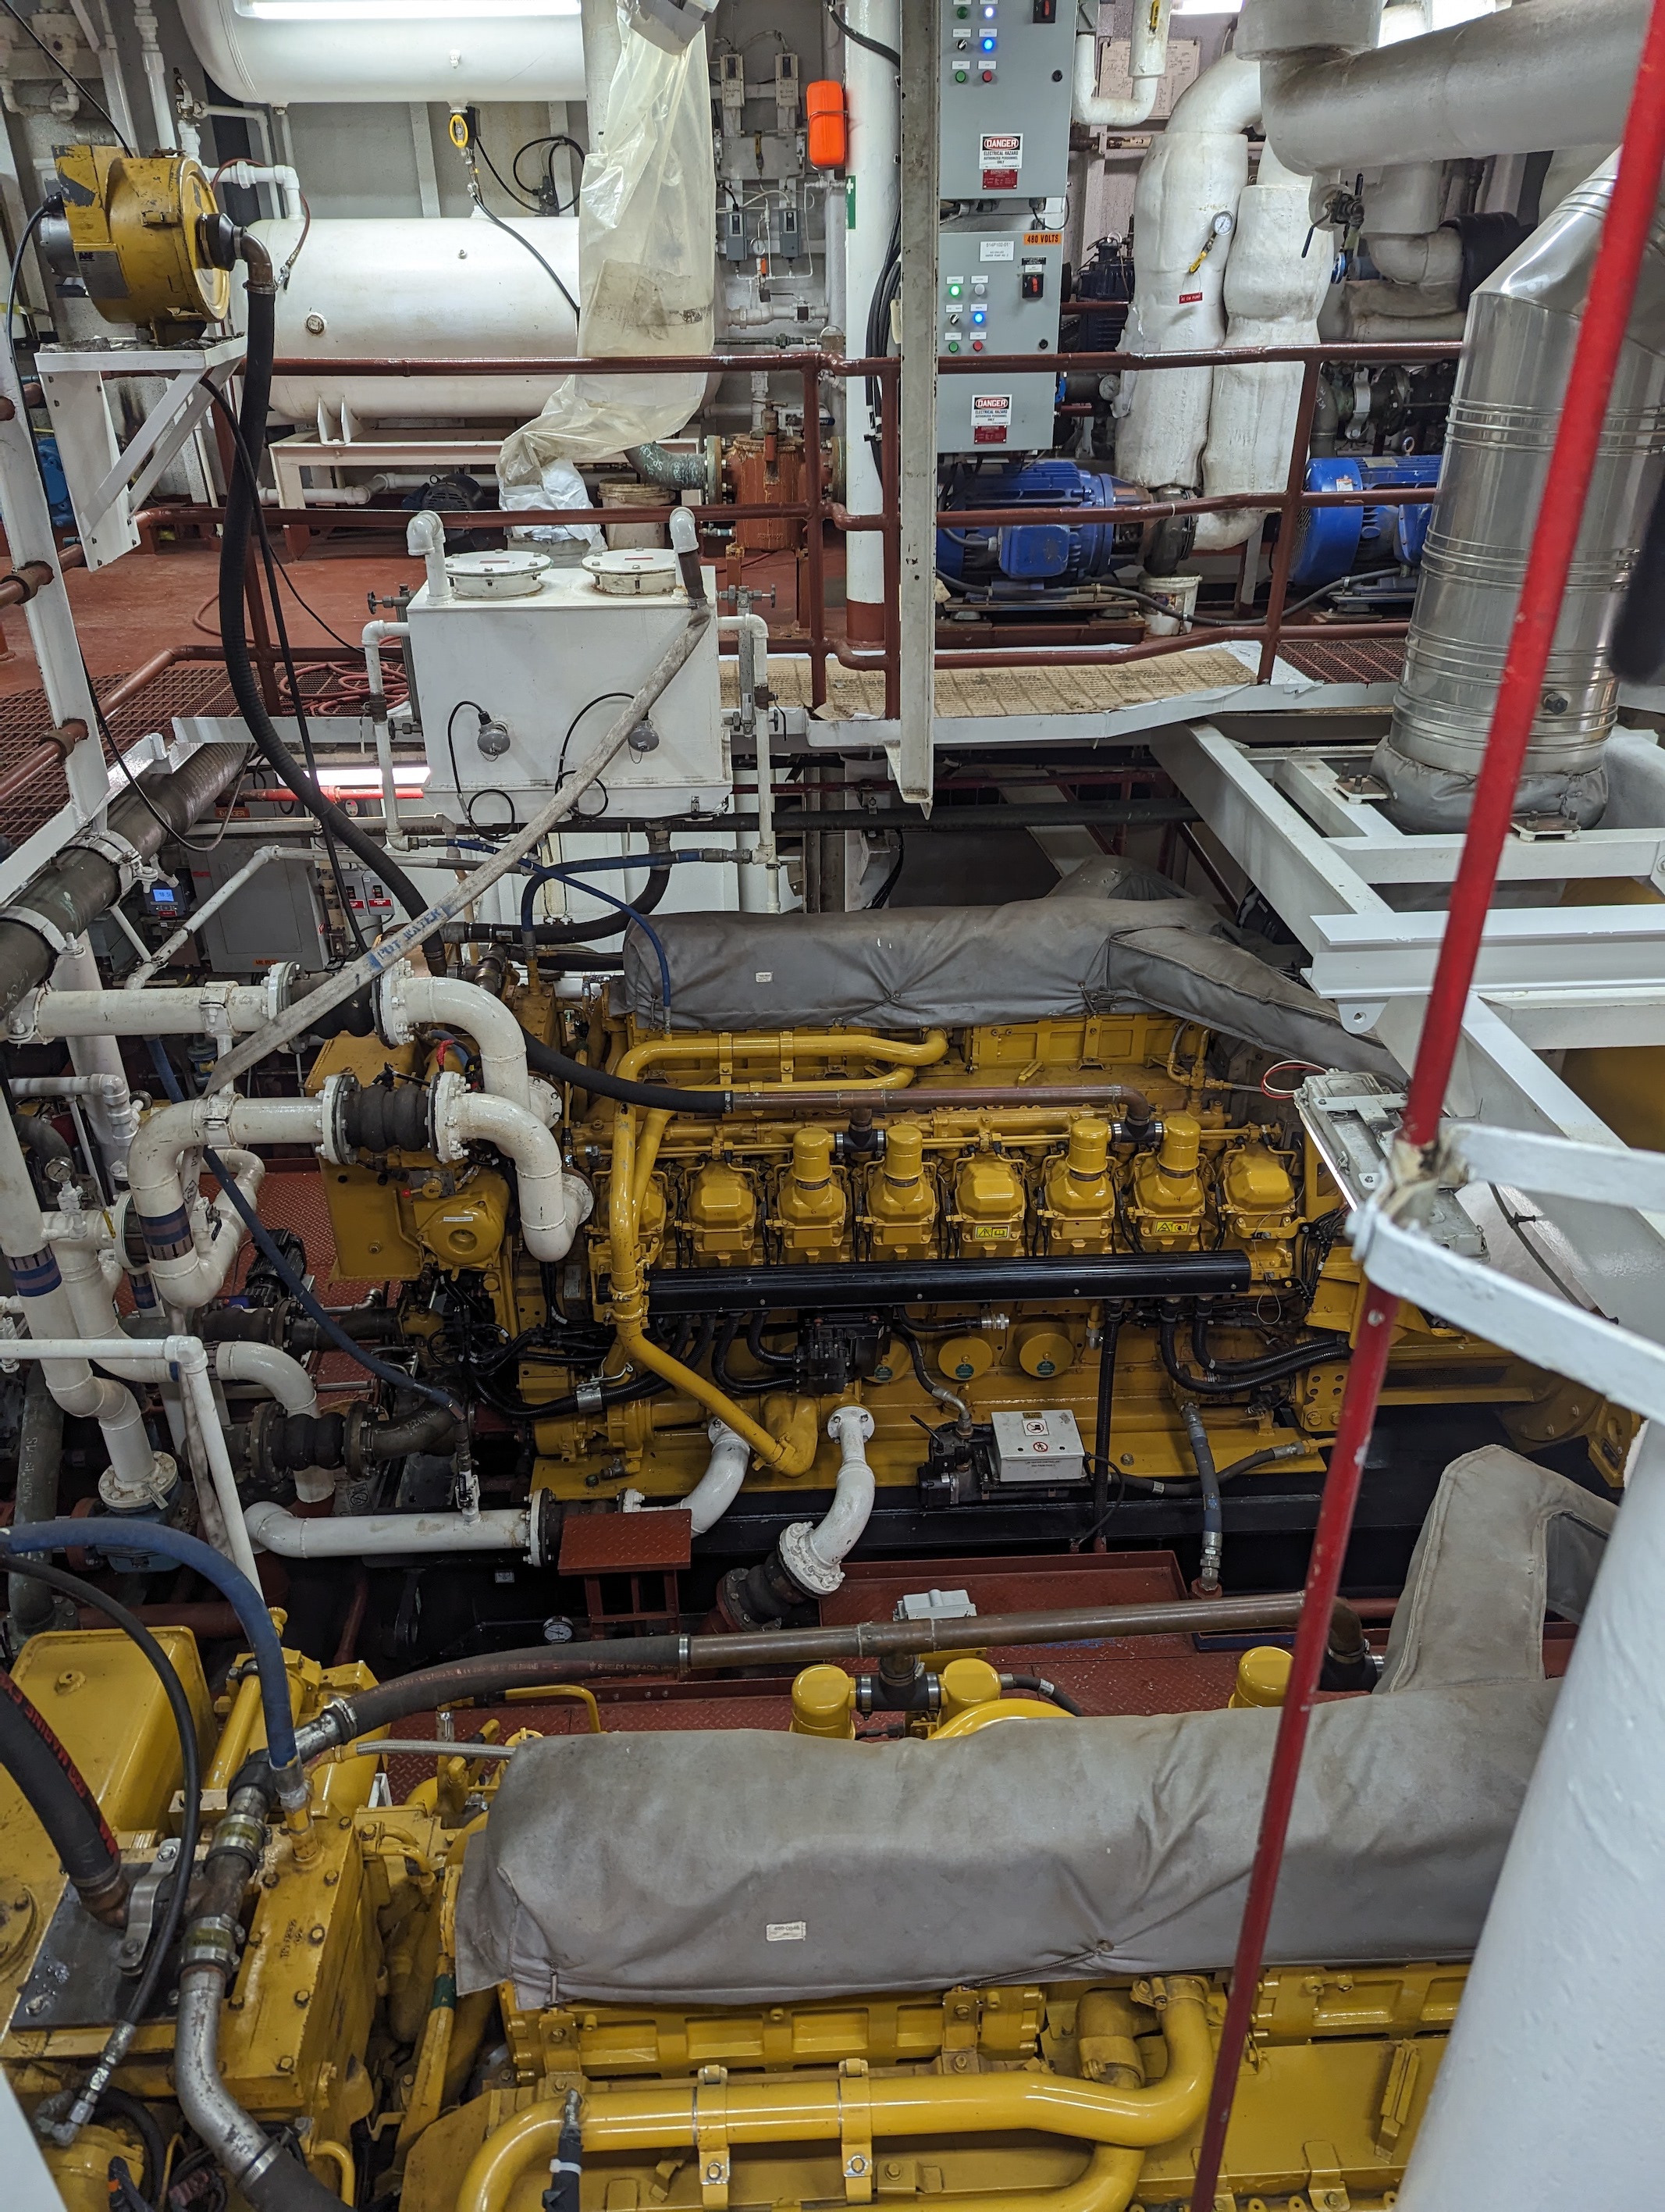 down in the engine room, this is two of four yellow engines